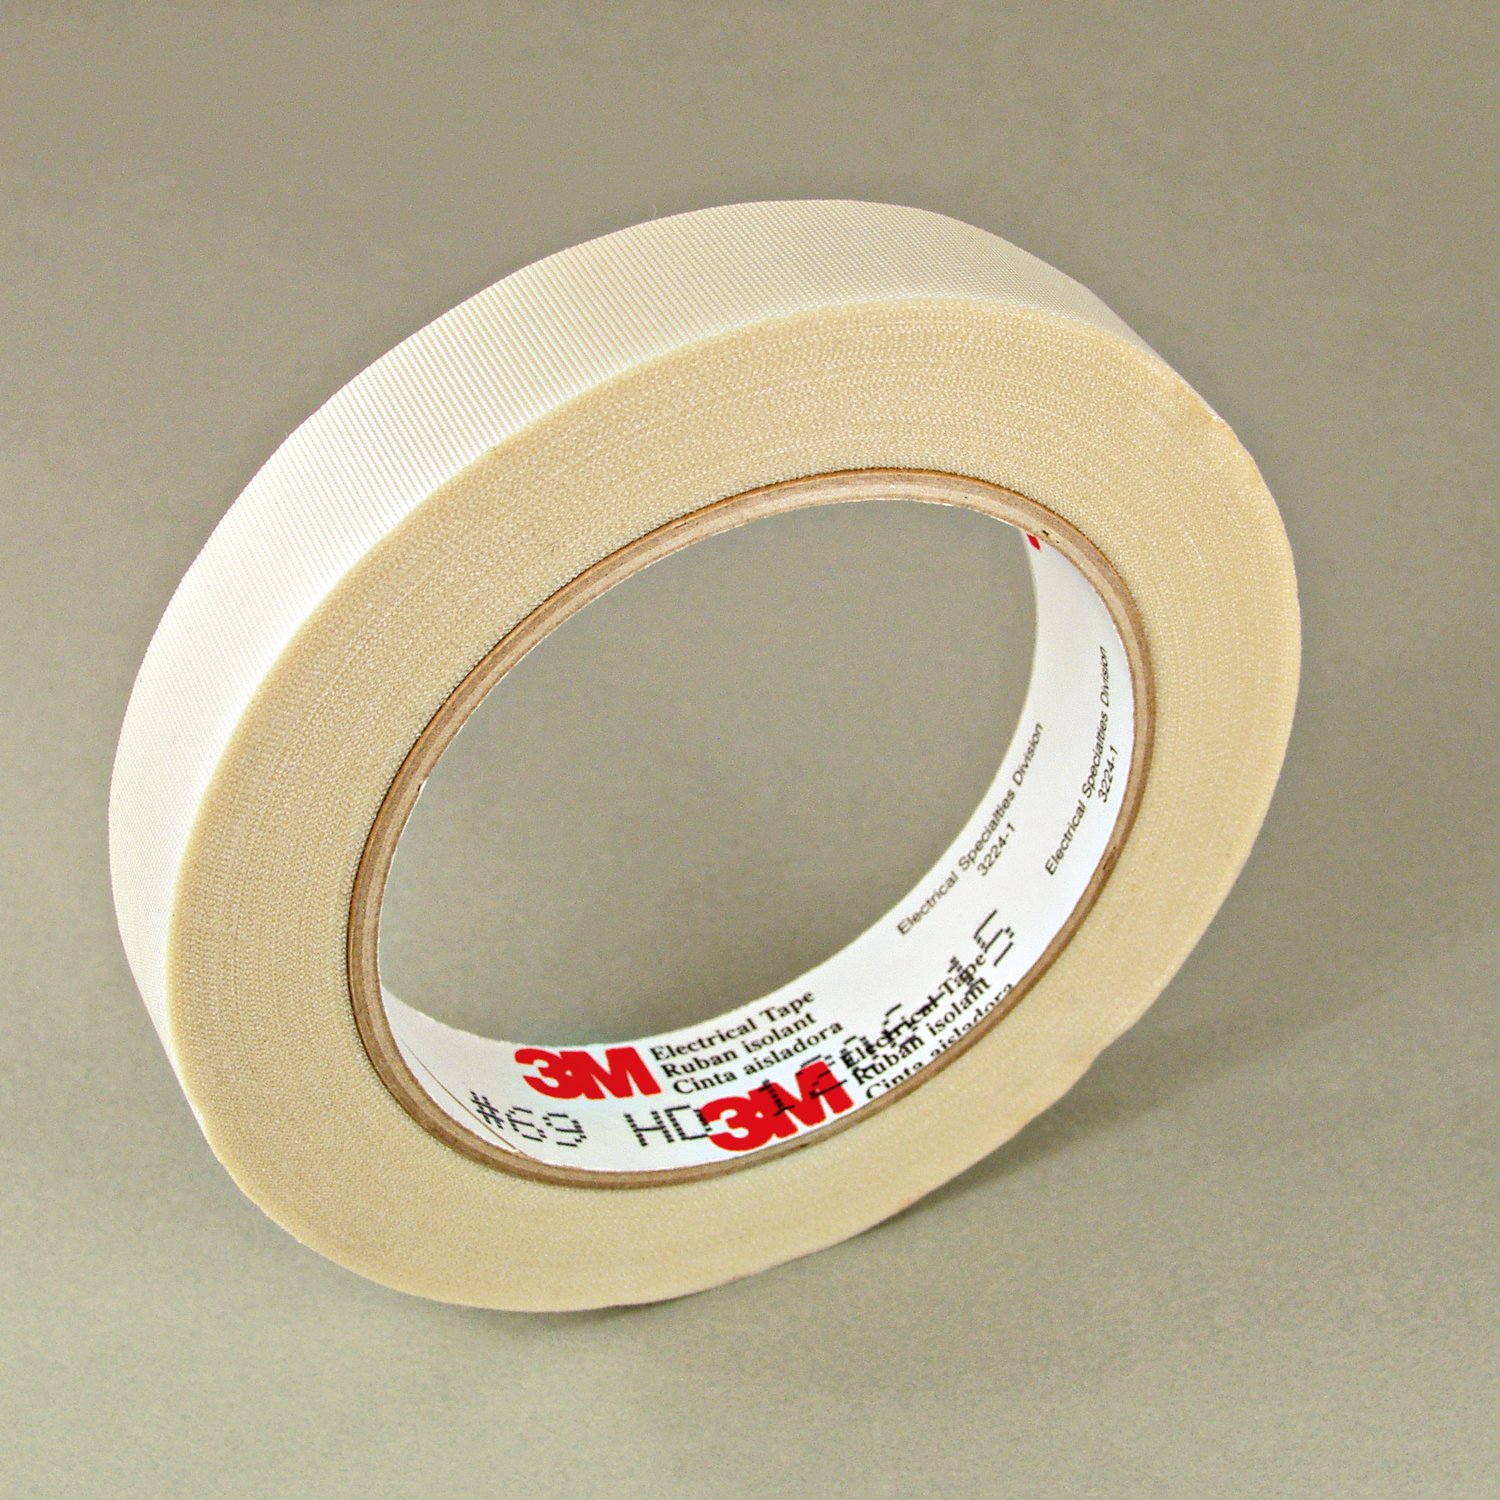 1" 3M 69 Glass Cloth Electrical Tape (3M69) with Silicone Adhesive 180°C, white, 1" wide x  36 YD roll